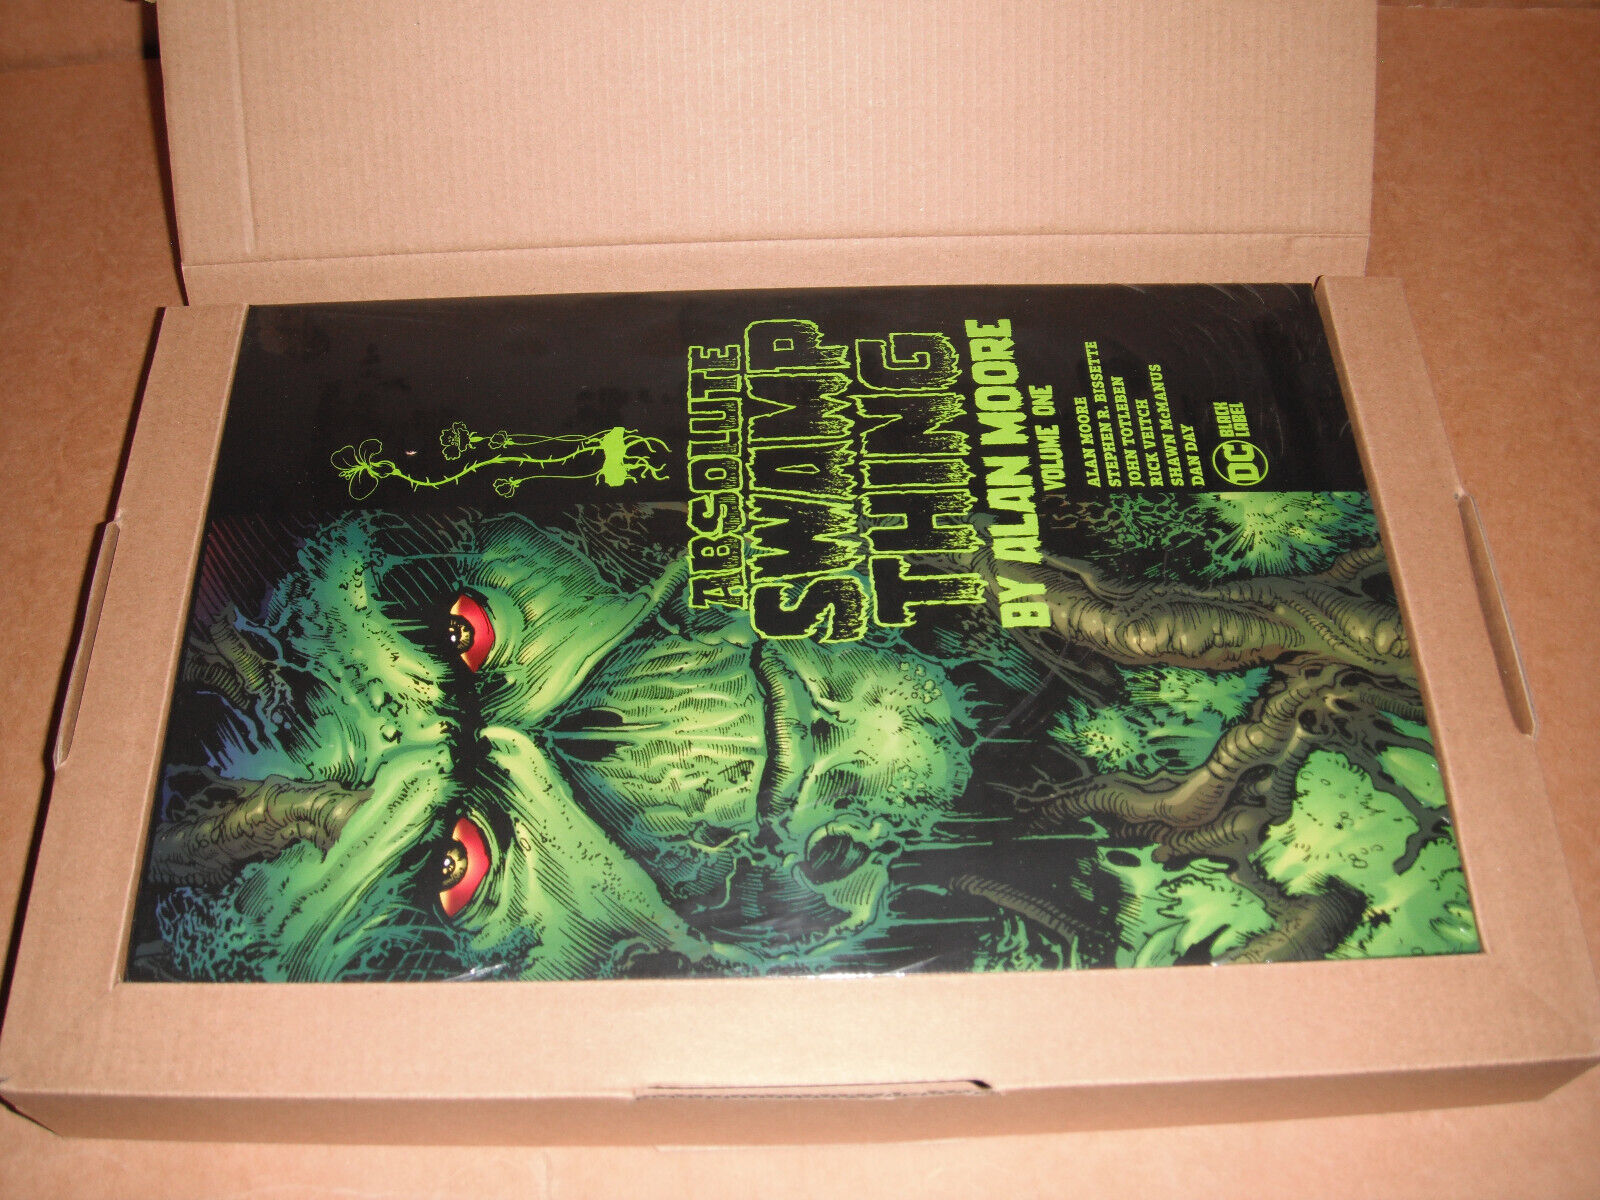 Absolute Swamp Thing by Alan Moore Vol. 1